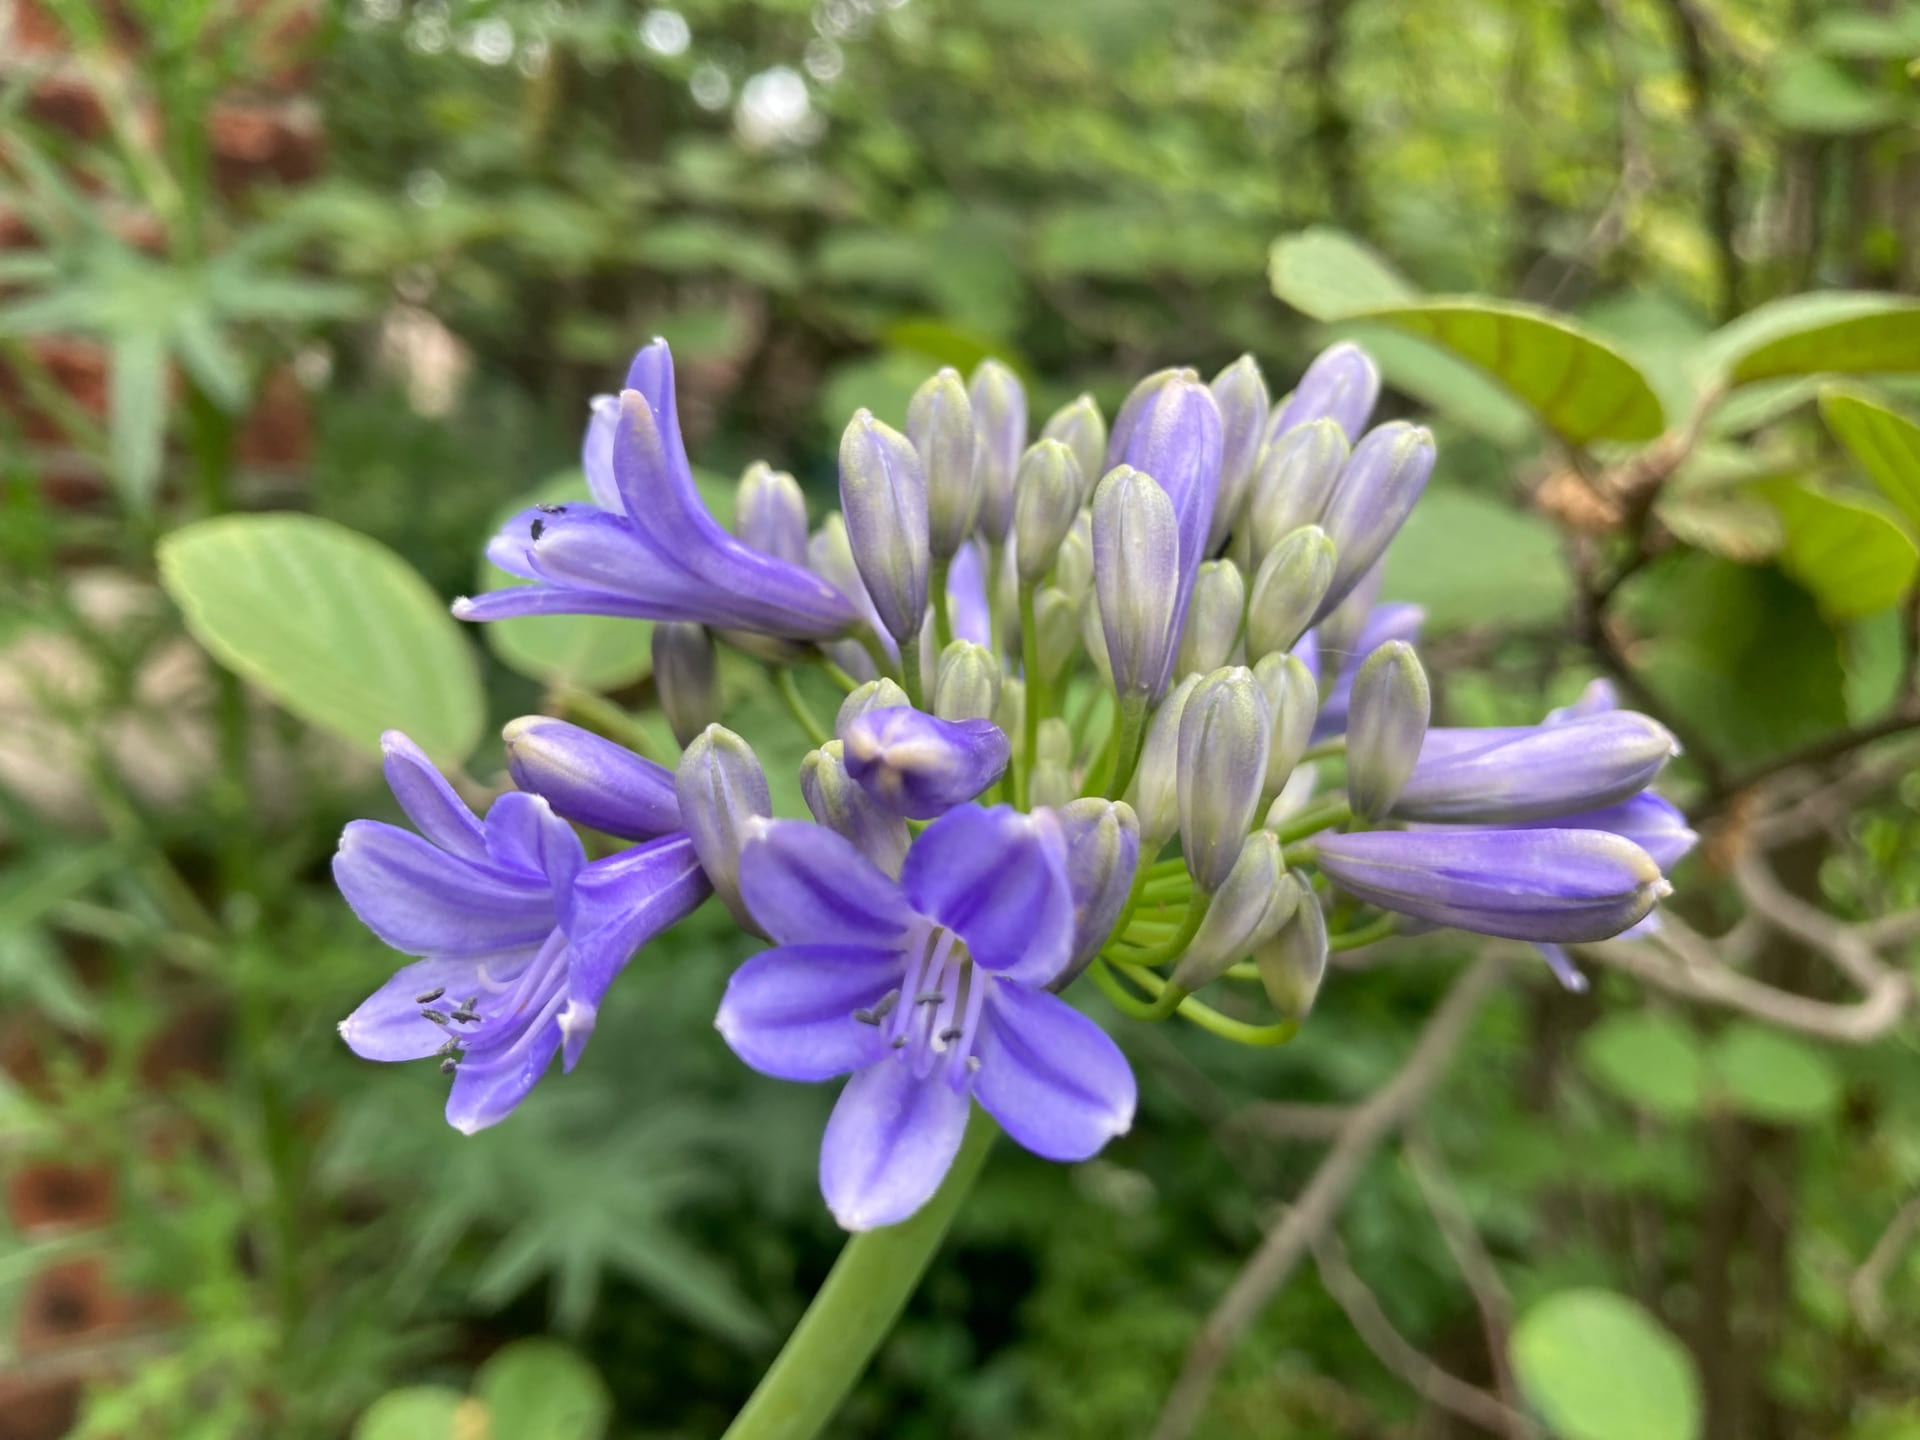 Agapanthus 'Storm Cloud' survives Philadelphia's cold, wet winters in a protected corner of the garden.